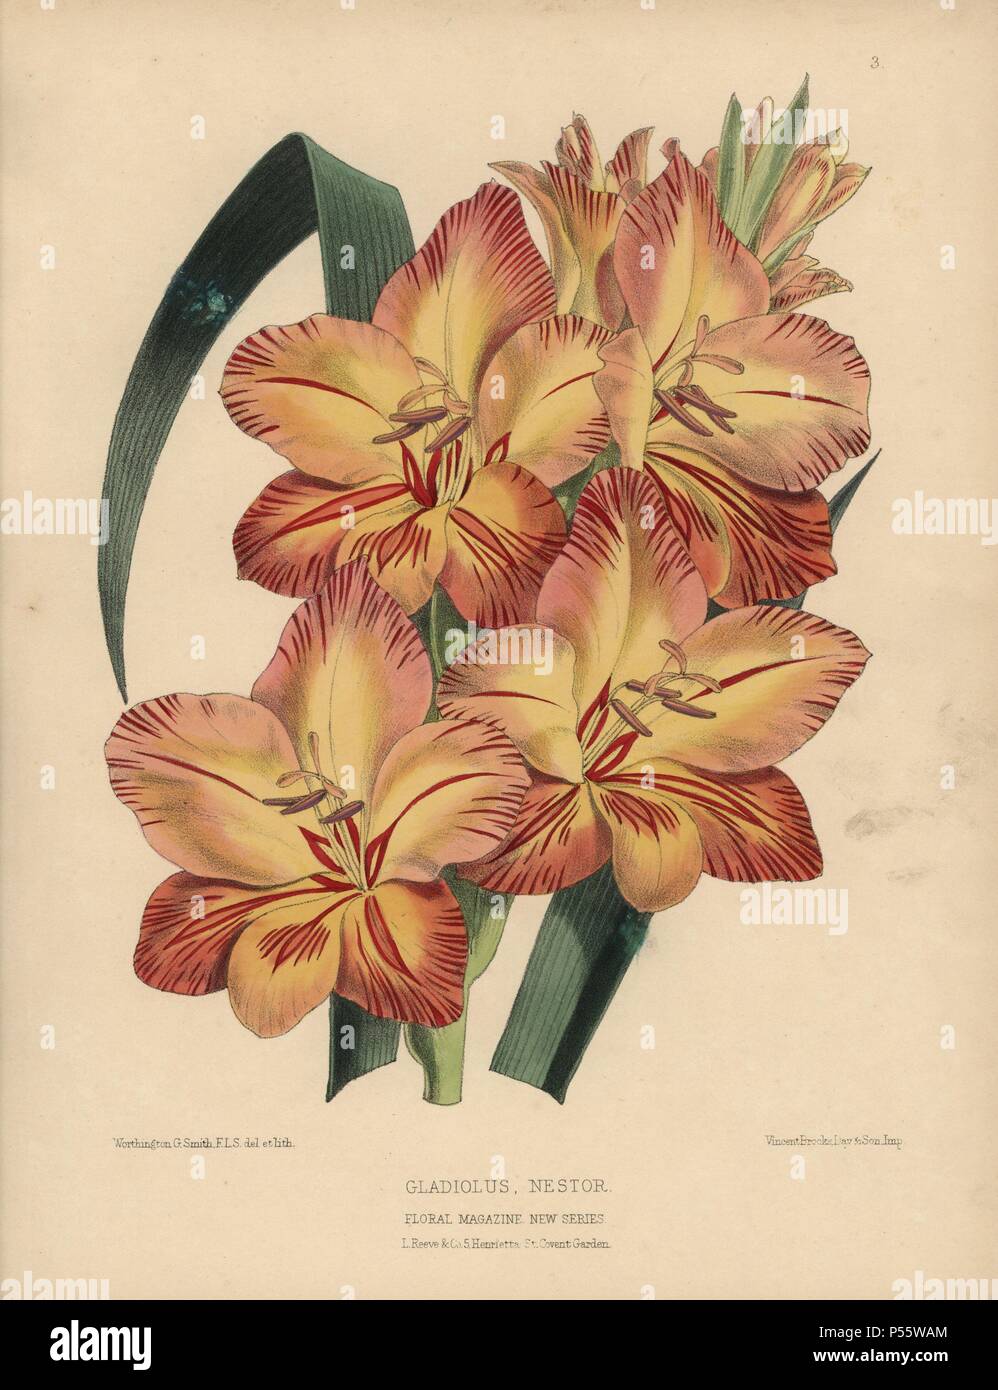 Orange and crimson gladiolus nestor. Handcolored botanical drawn and lithographed by W.G. Smith from H.H. Dombrain's 'Floral Magazine' 1872.. Worthington G. Smith (1835-1917), architect, engraver and mycologist. Smith also illustrated 'The Gardener's Chronicle.' Henry Honywood Dombrain (1818-1905), clergyman gardener, was editor of the 'Floral Magazine' from 1862 to 1873. Stock Photo